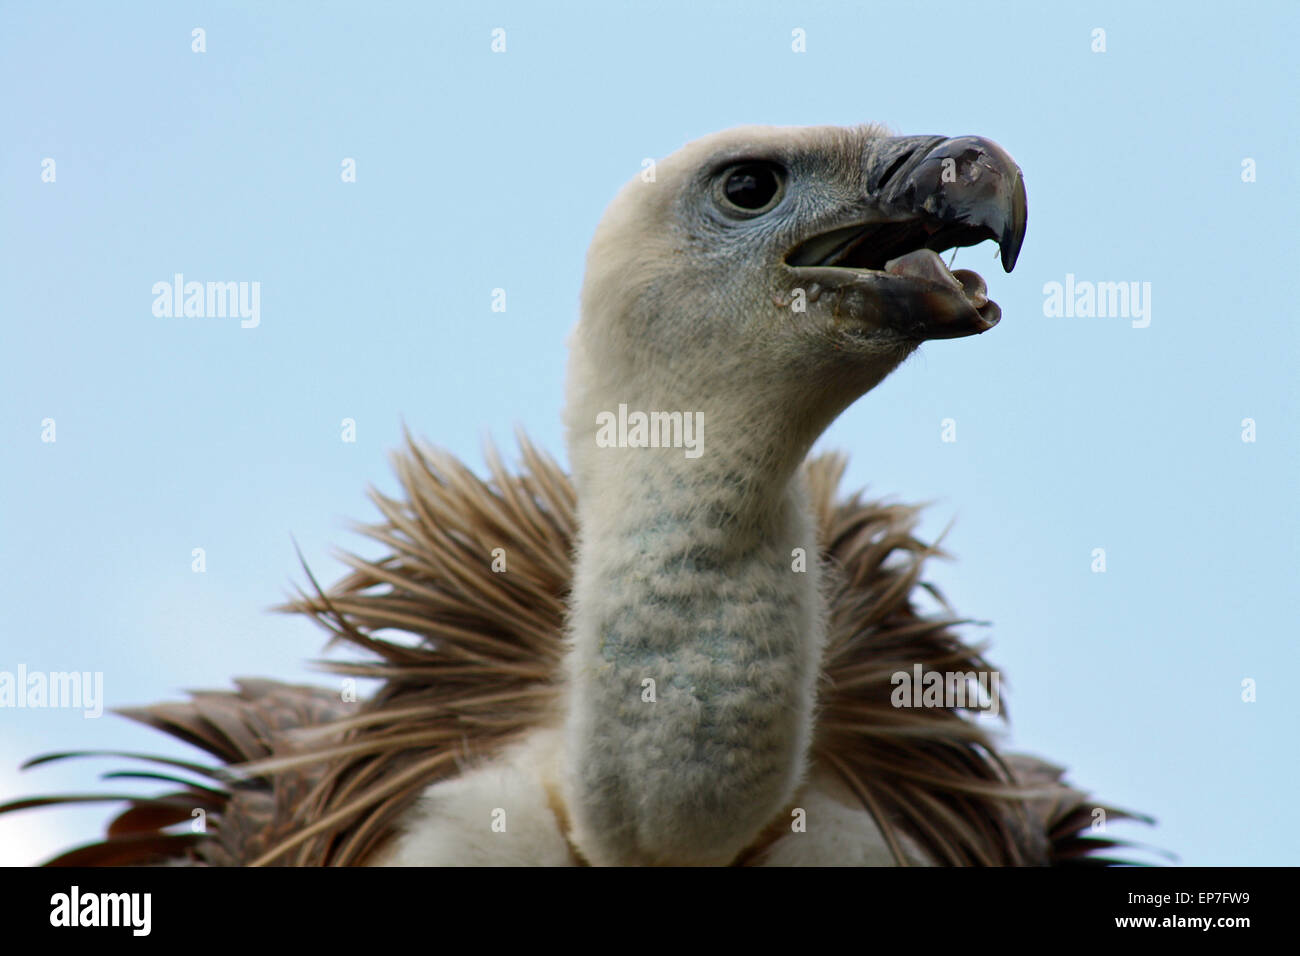 Vulture head neck and feathers against a pale blue sky. Stock Photo